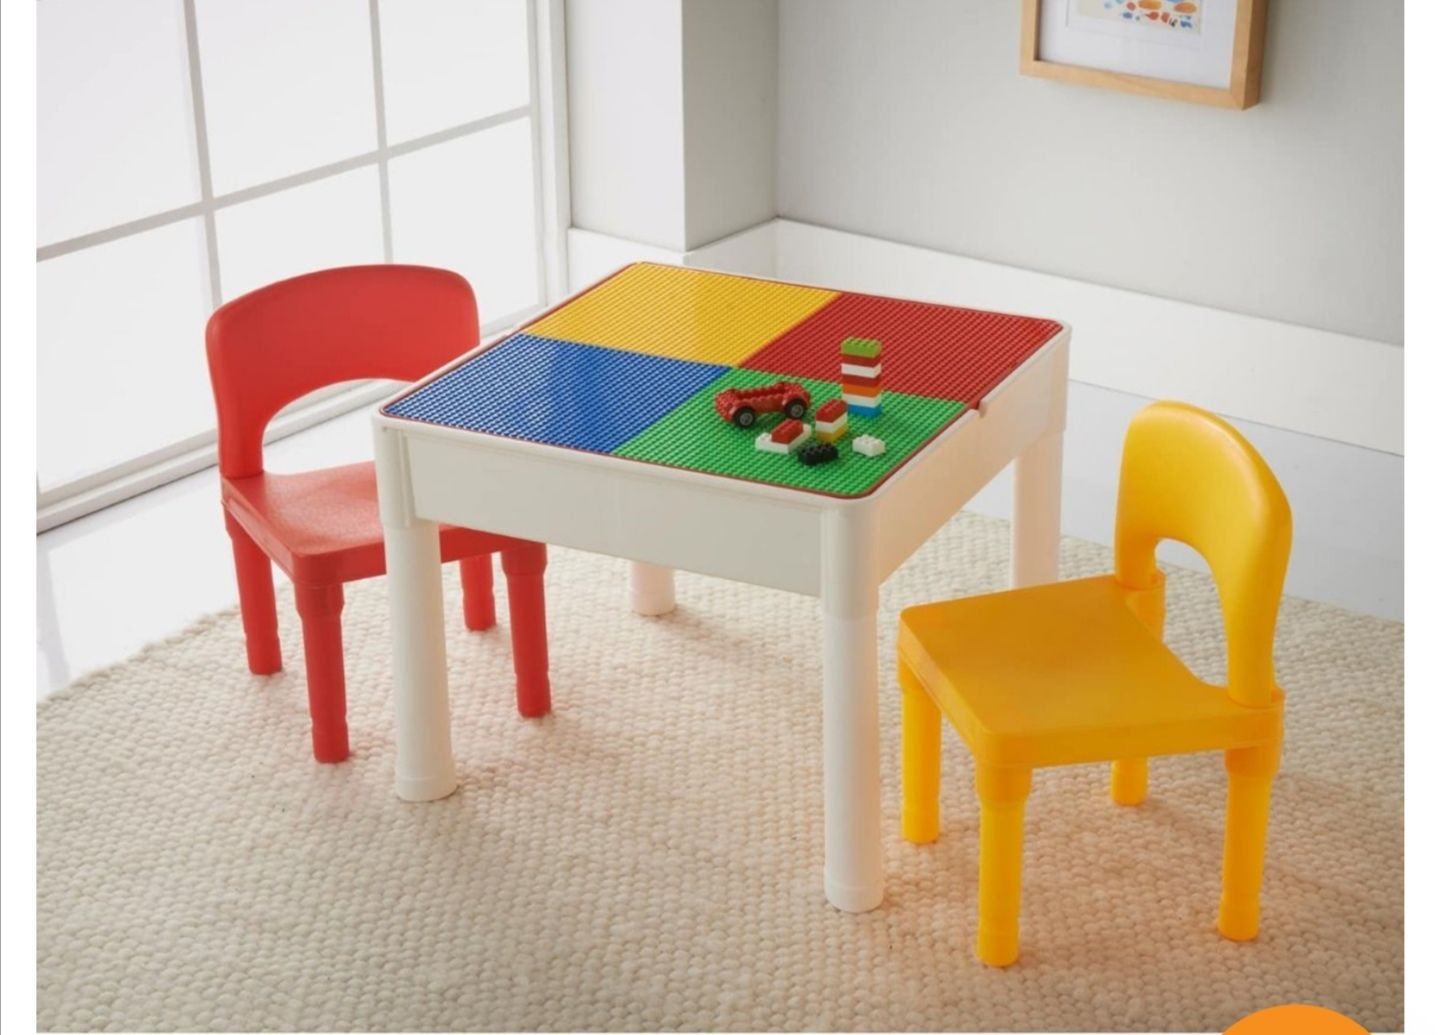 2 in 1 child activity table chair set. £20 was £30 @B&M - hotukdeals